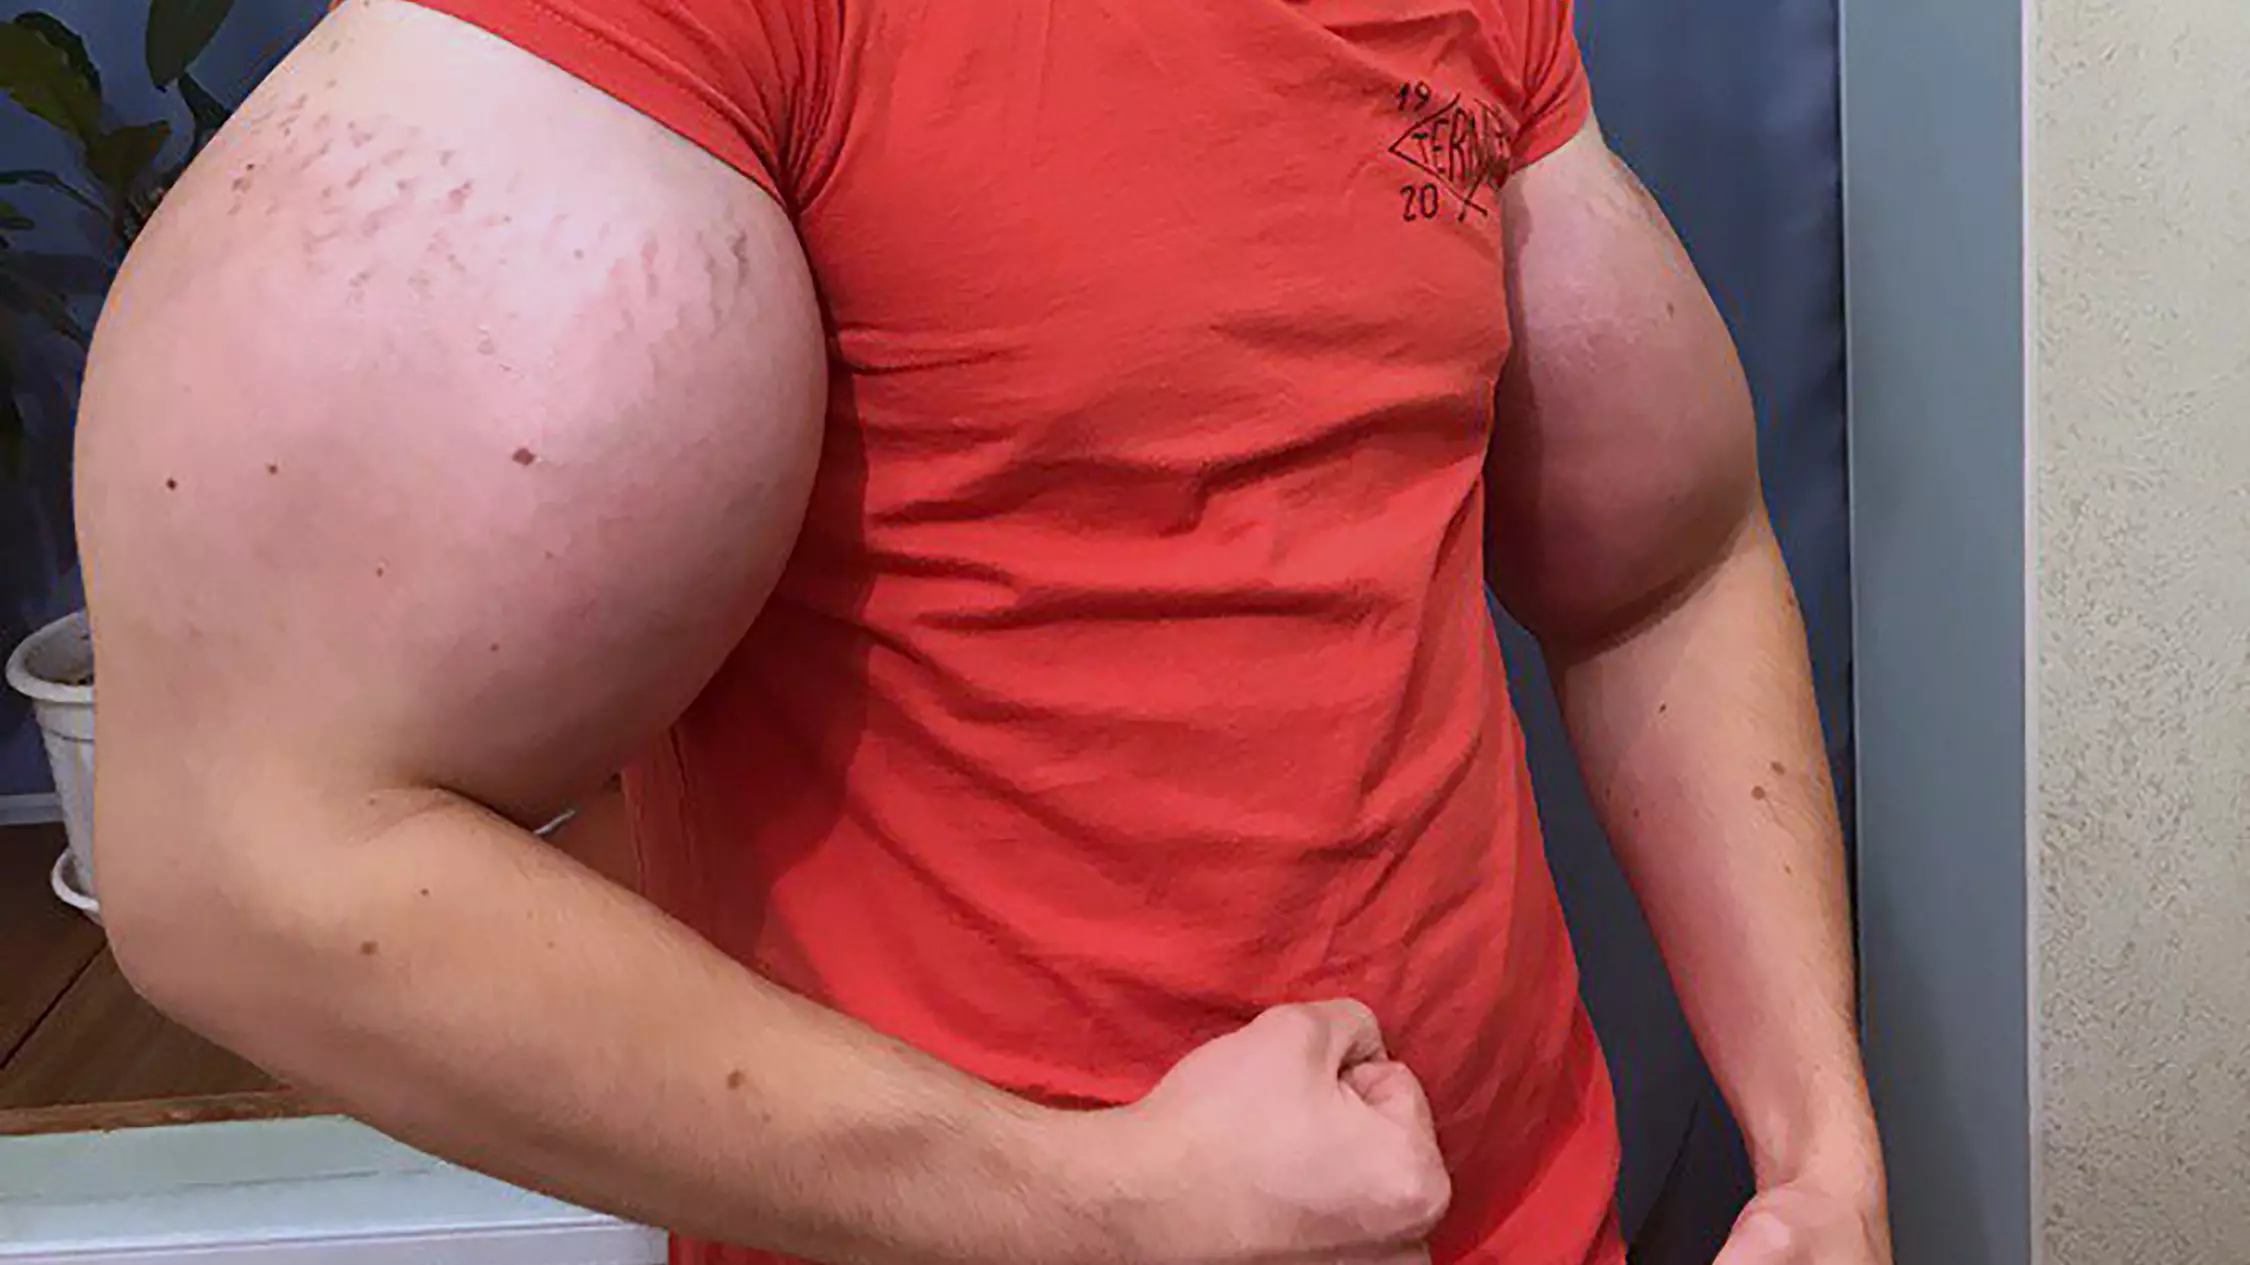 ​Man With Huge 'Popeye' Arms Could Lose Them, According To Doctors